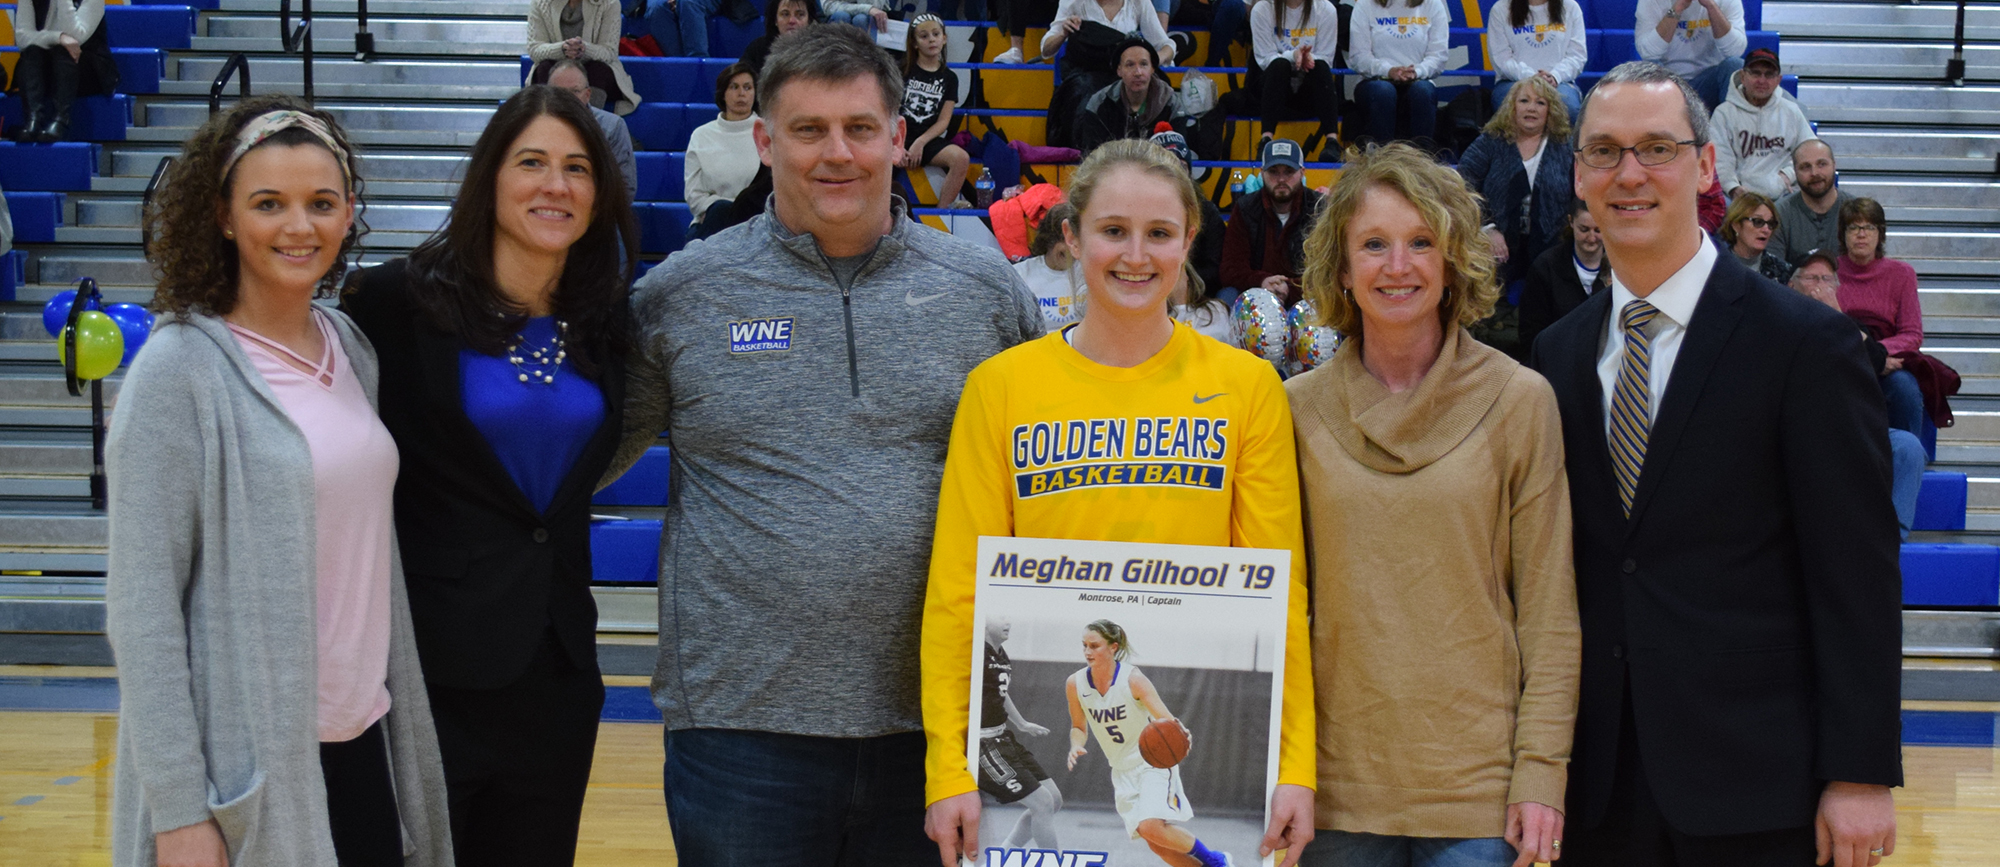 Senior captain Meghan Gilhool was honored before the start of Western New England's 52-30 win over Curry on Saturday. (Photo by Rachael Margossian)